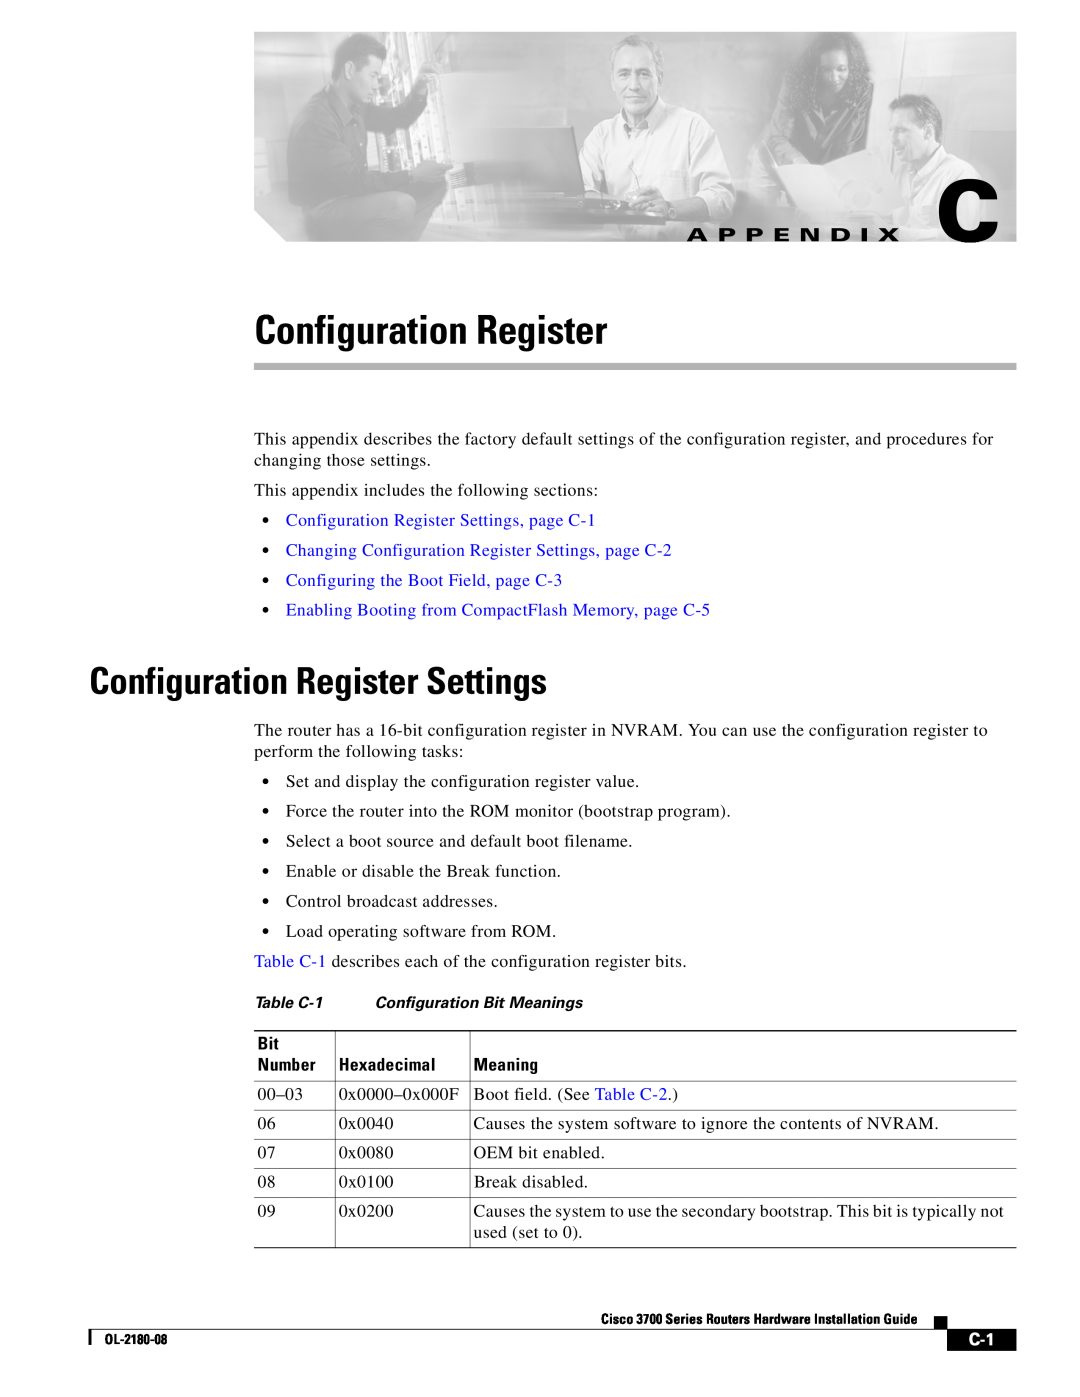 Cisco Systems 3700 Series Configuration Register Settings, A P P E N D I X C, Configuring the Boot Field, page C-3 